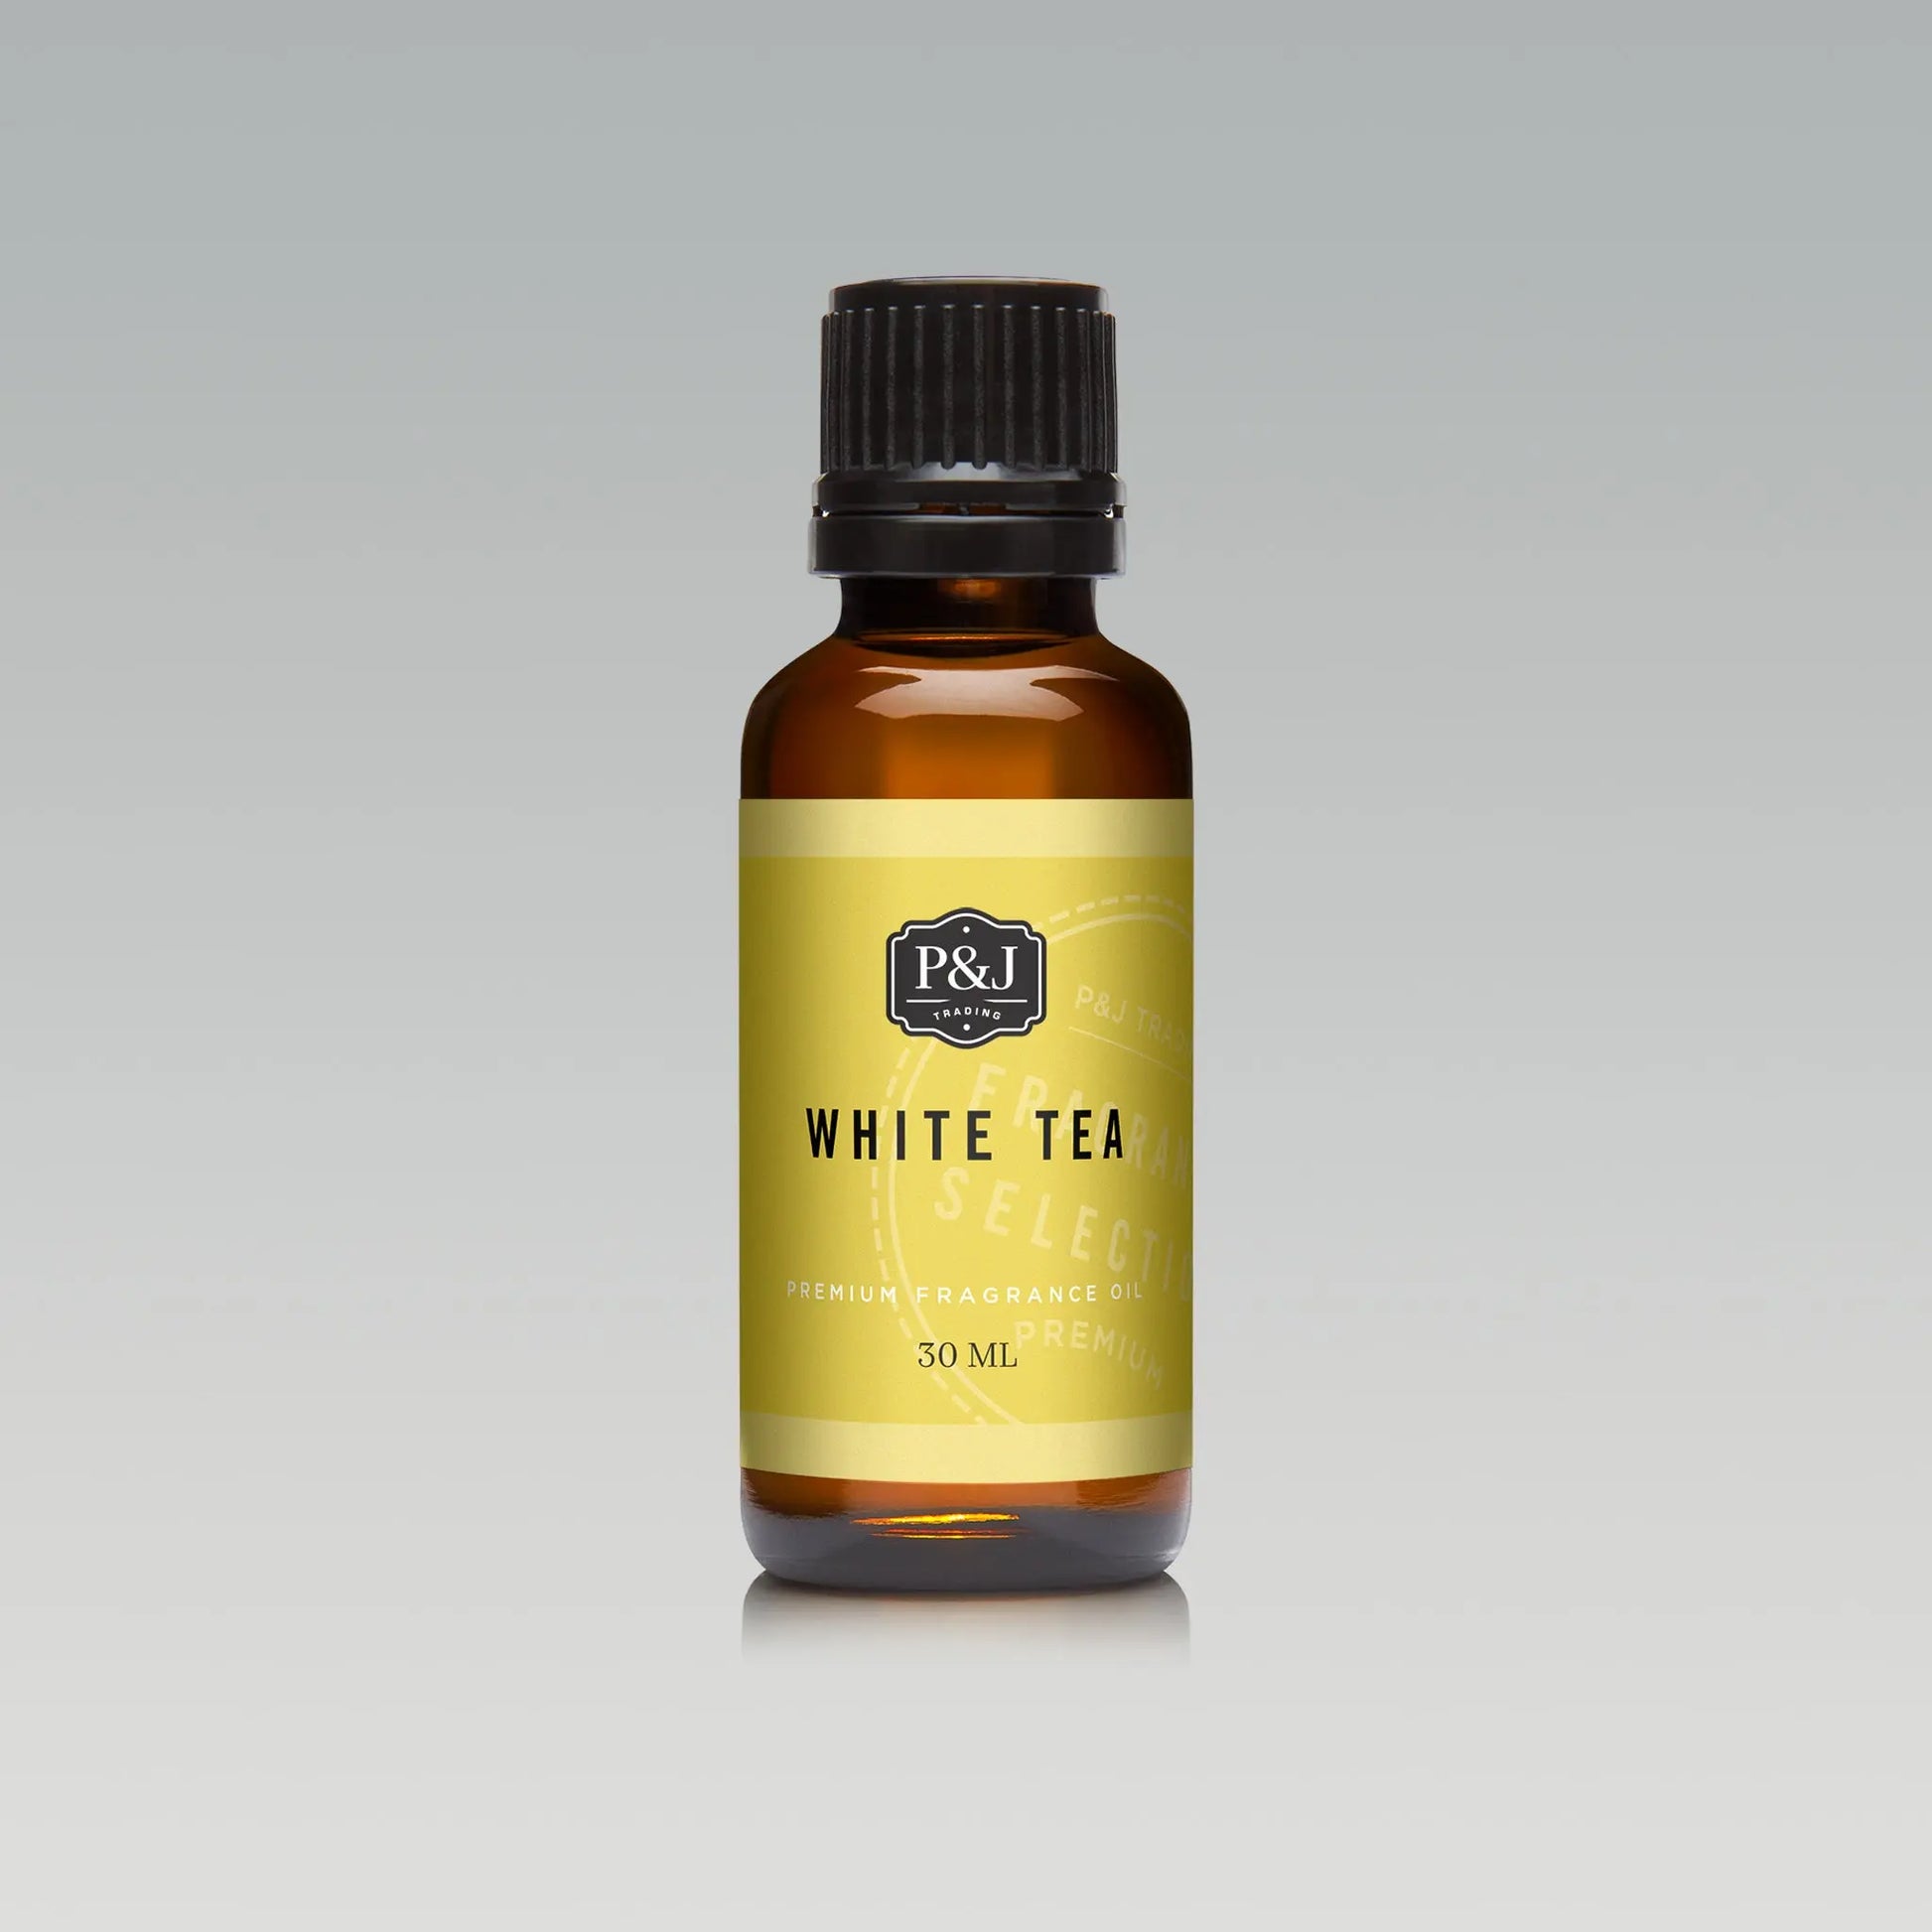 P&J Fragrance Oil  White Tea Oil 30ml - Candle Scents for Candle Making  Freshie Scents Soap Making Supplies Diffuser Oil Scents White Tea 1 Fl Oz  (Pack of 1)